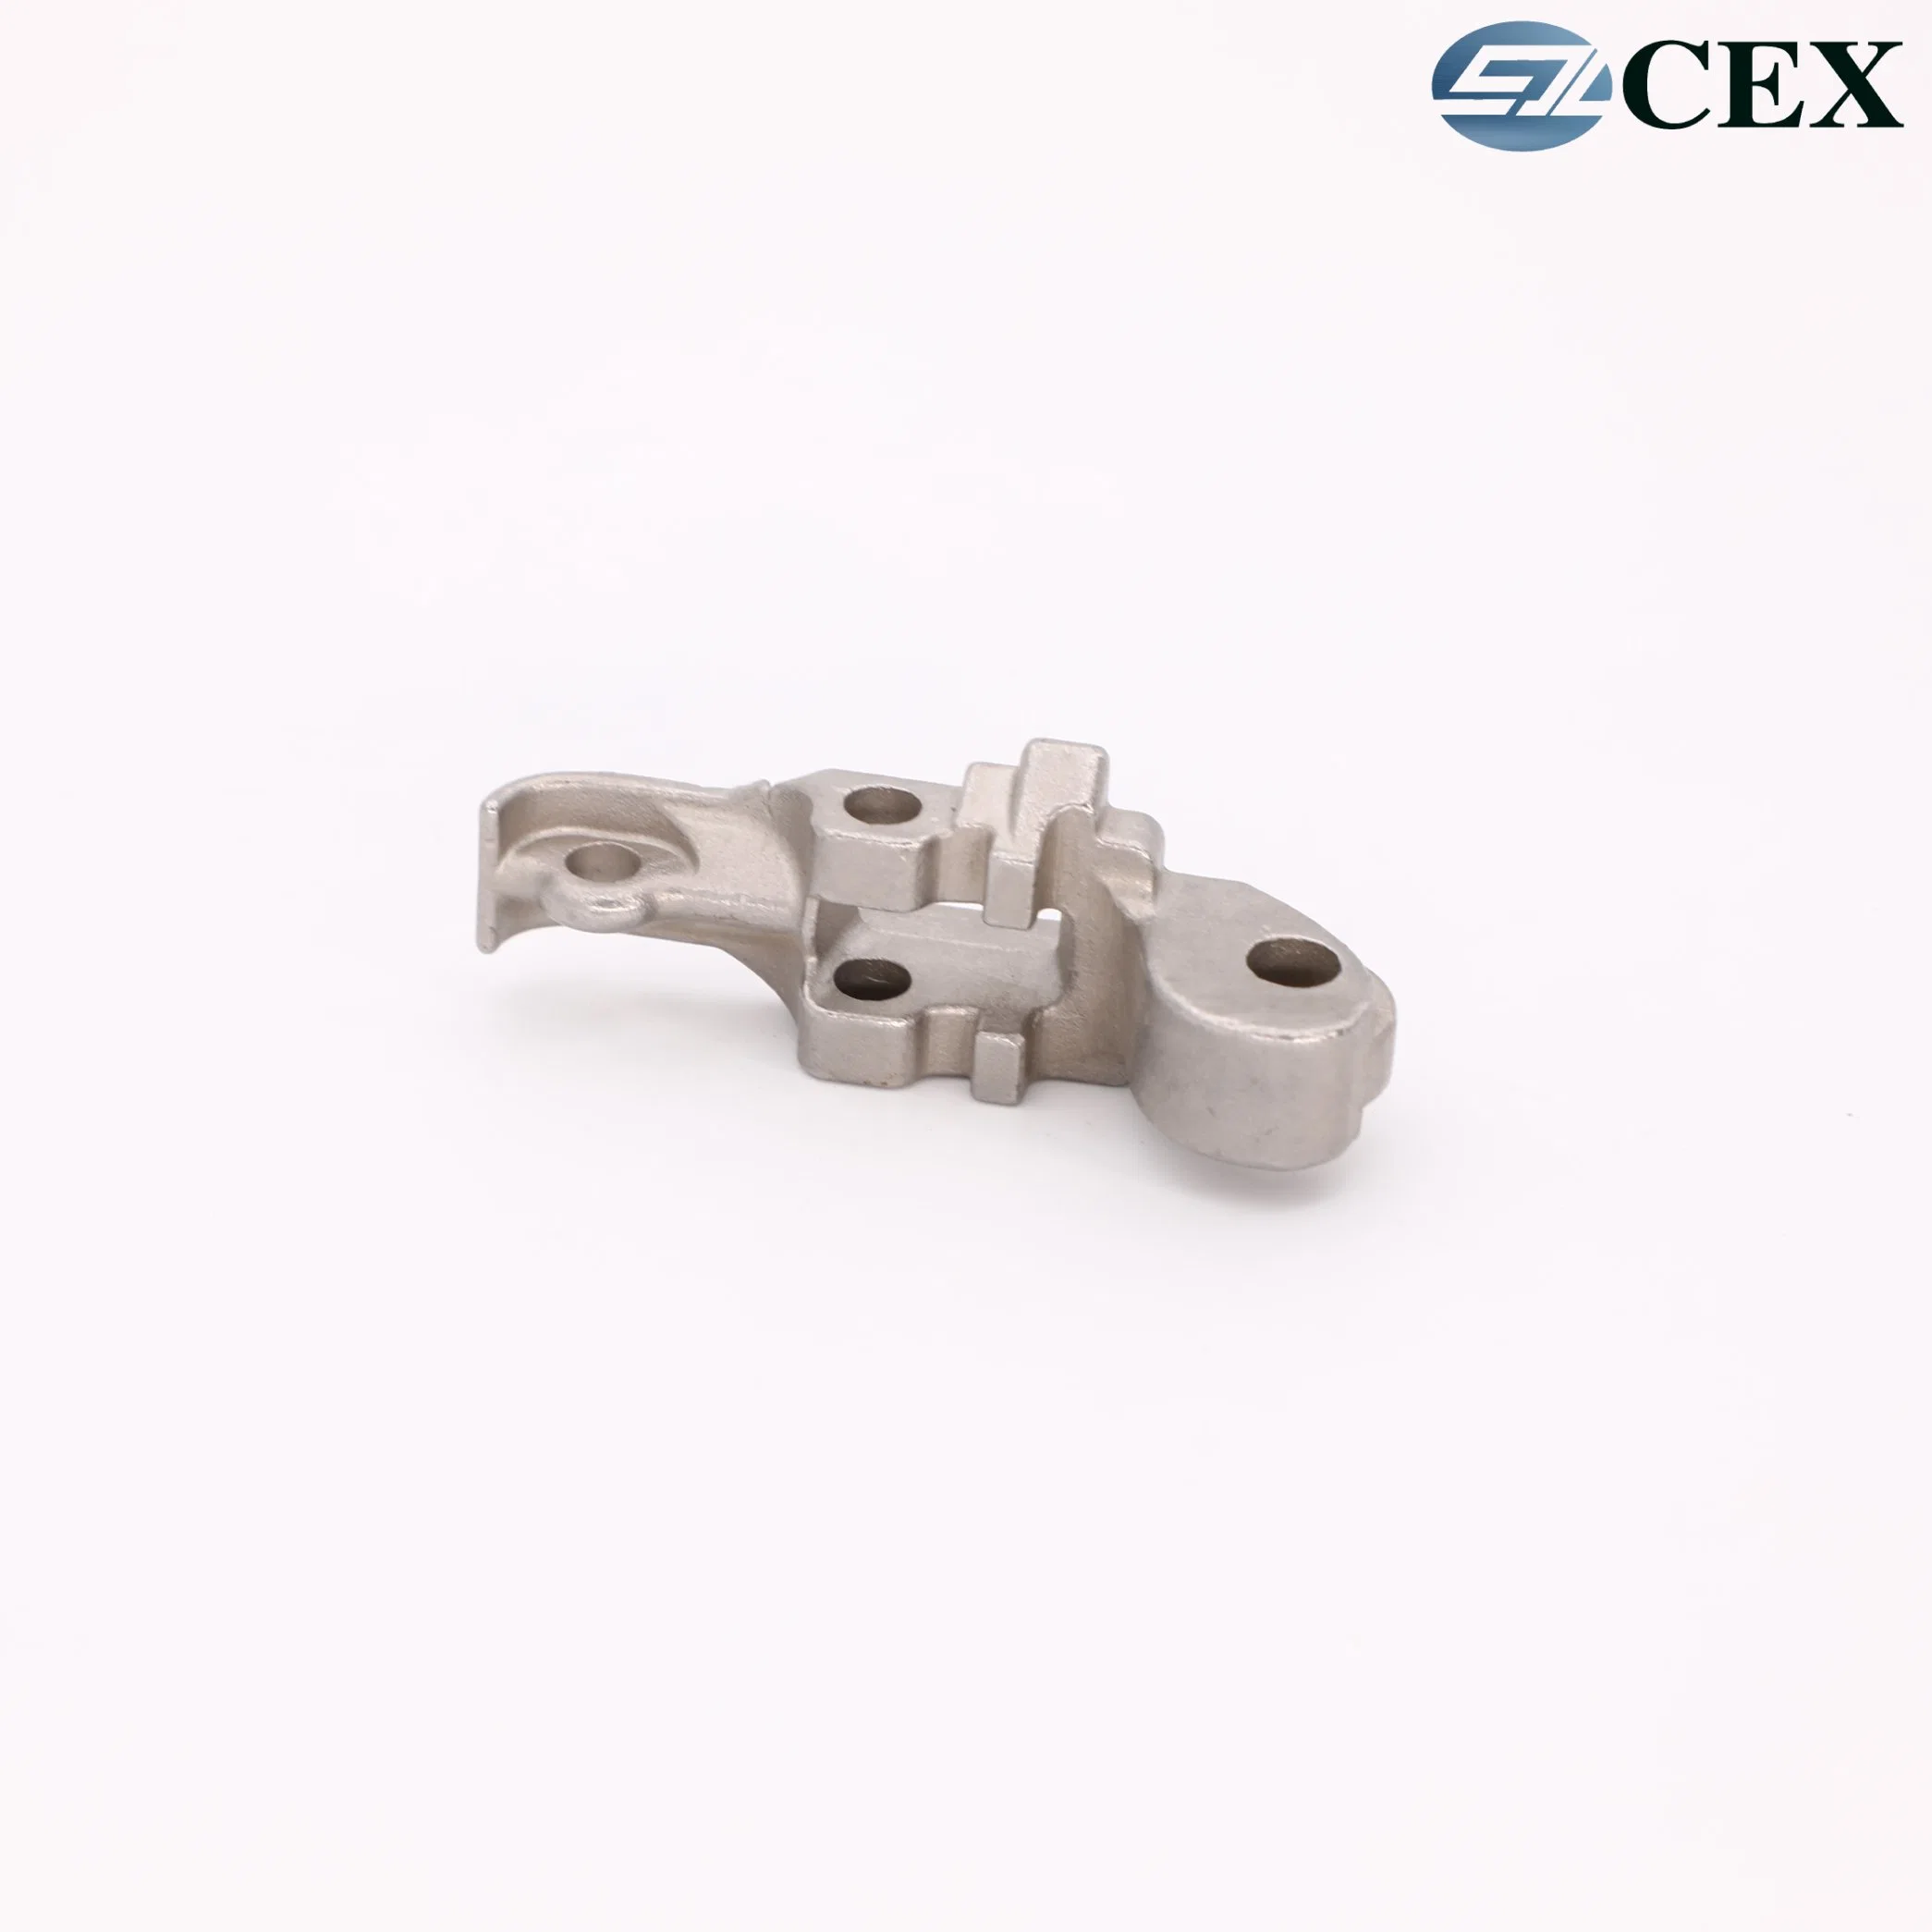 A356-T6 Aluminum Alloy Light Weight High Precision Die Casting Bicycle Accessories